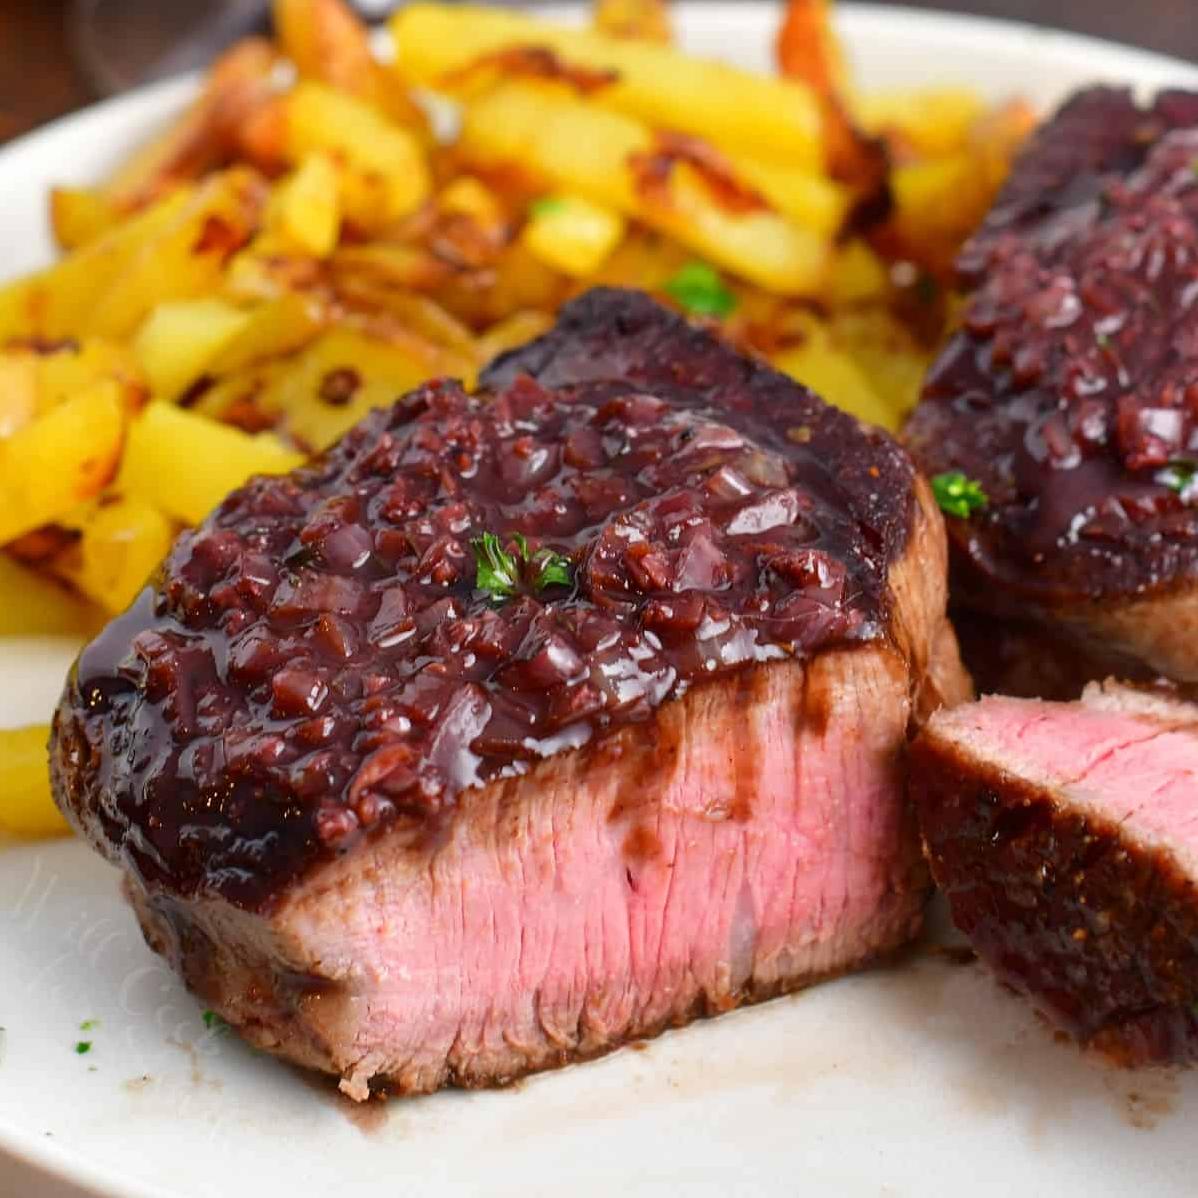  A glass of red wine can elevate any meal, but this steak takes it to the next level.